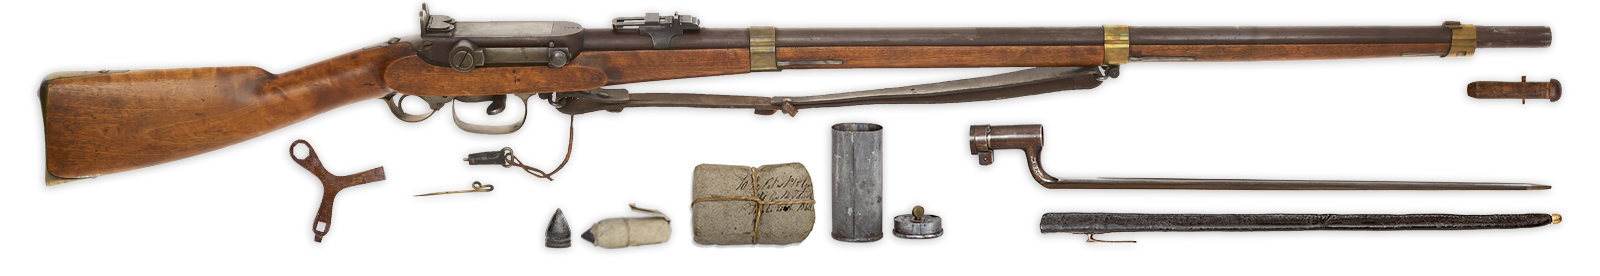 Model 1849 Army sharpshooter rifle with accessories. From left to right: Screwdriver, nipple pick, stopper, bullet, paper cartridge, cartridge bundle, tin container with oil bottle in the lid, bayonet with scabbard and tompion.